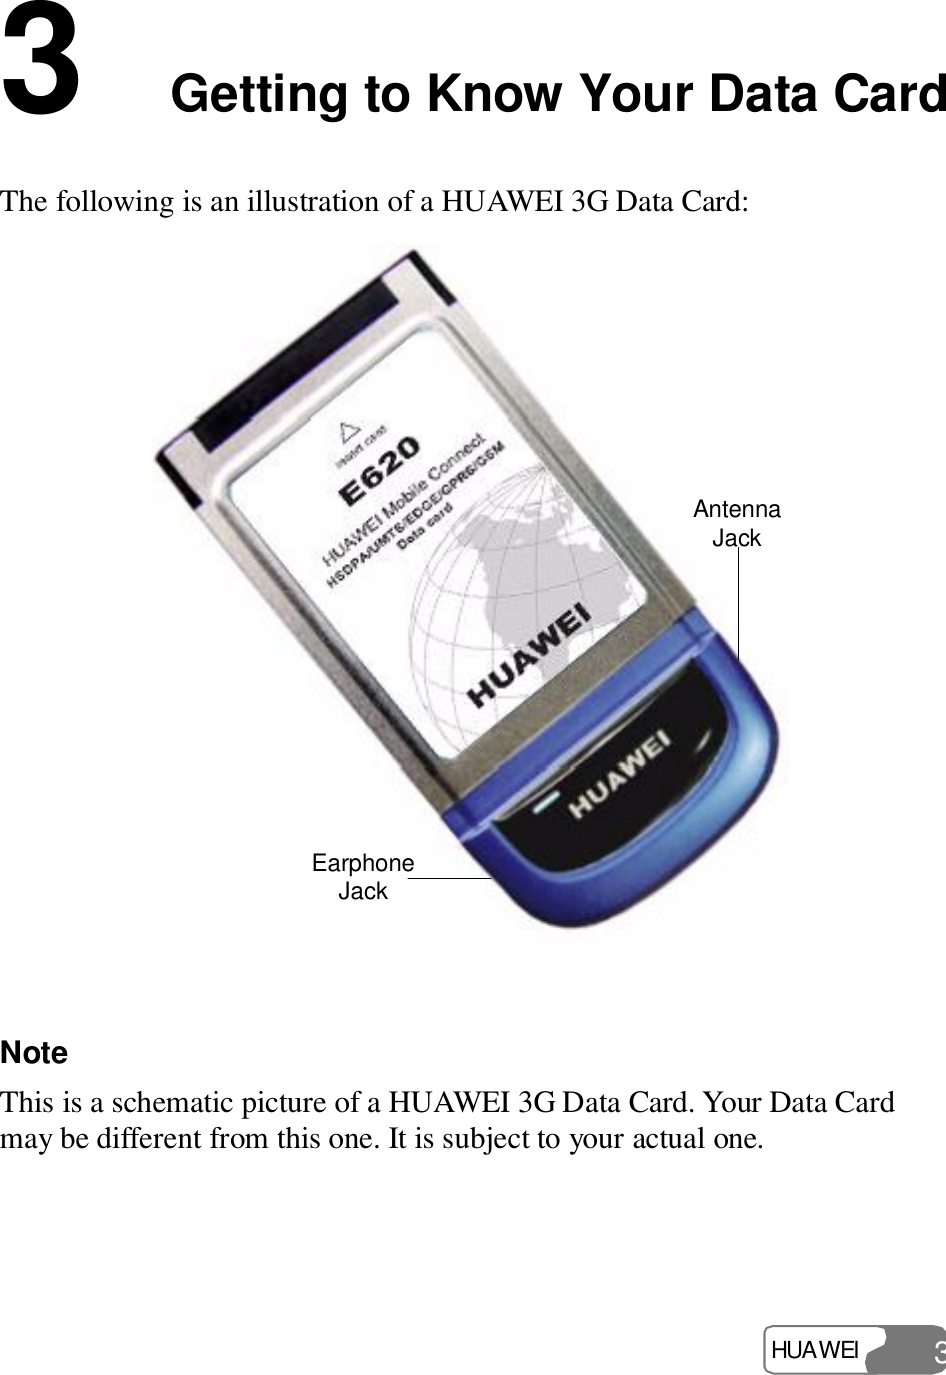  HUAWEI  3 3  Getting to Know Your Data Card The following is an illustration of a HUAWEI 3G Data Card: EarphoneJackAntennaJack Note  This is a schematic picture of a HUAWEI 3G Data Card. Your Data Card may be different from this one. It is subject to your actual one.  